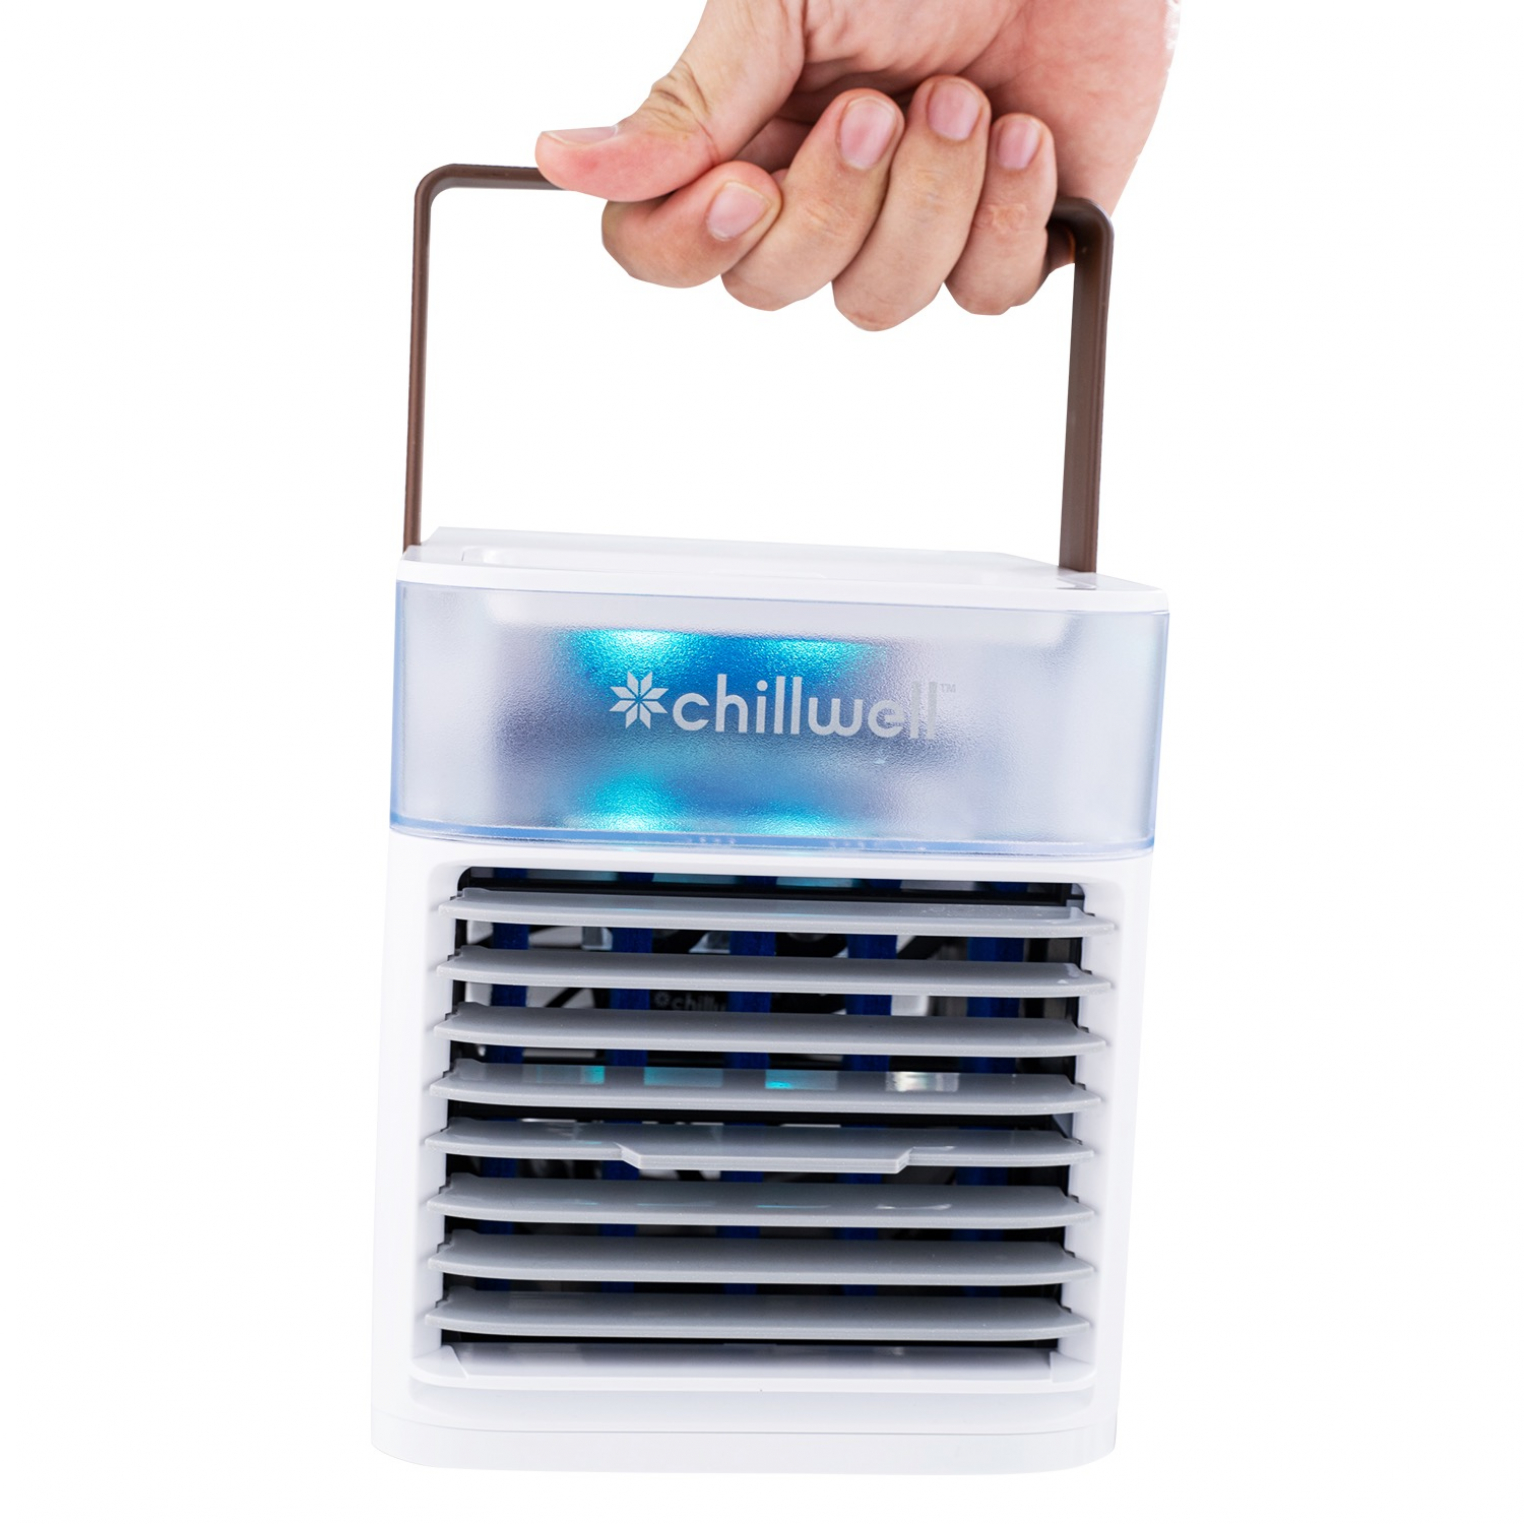 Chillwell AC Cooler Scam